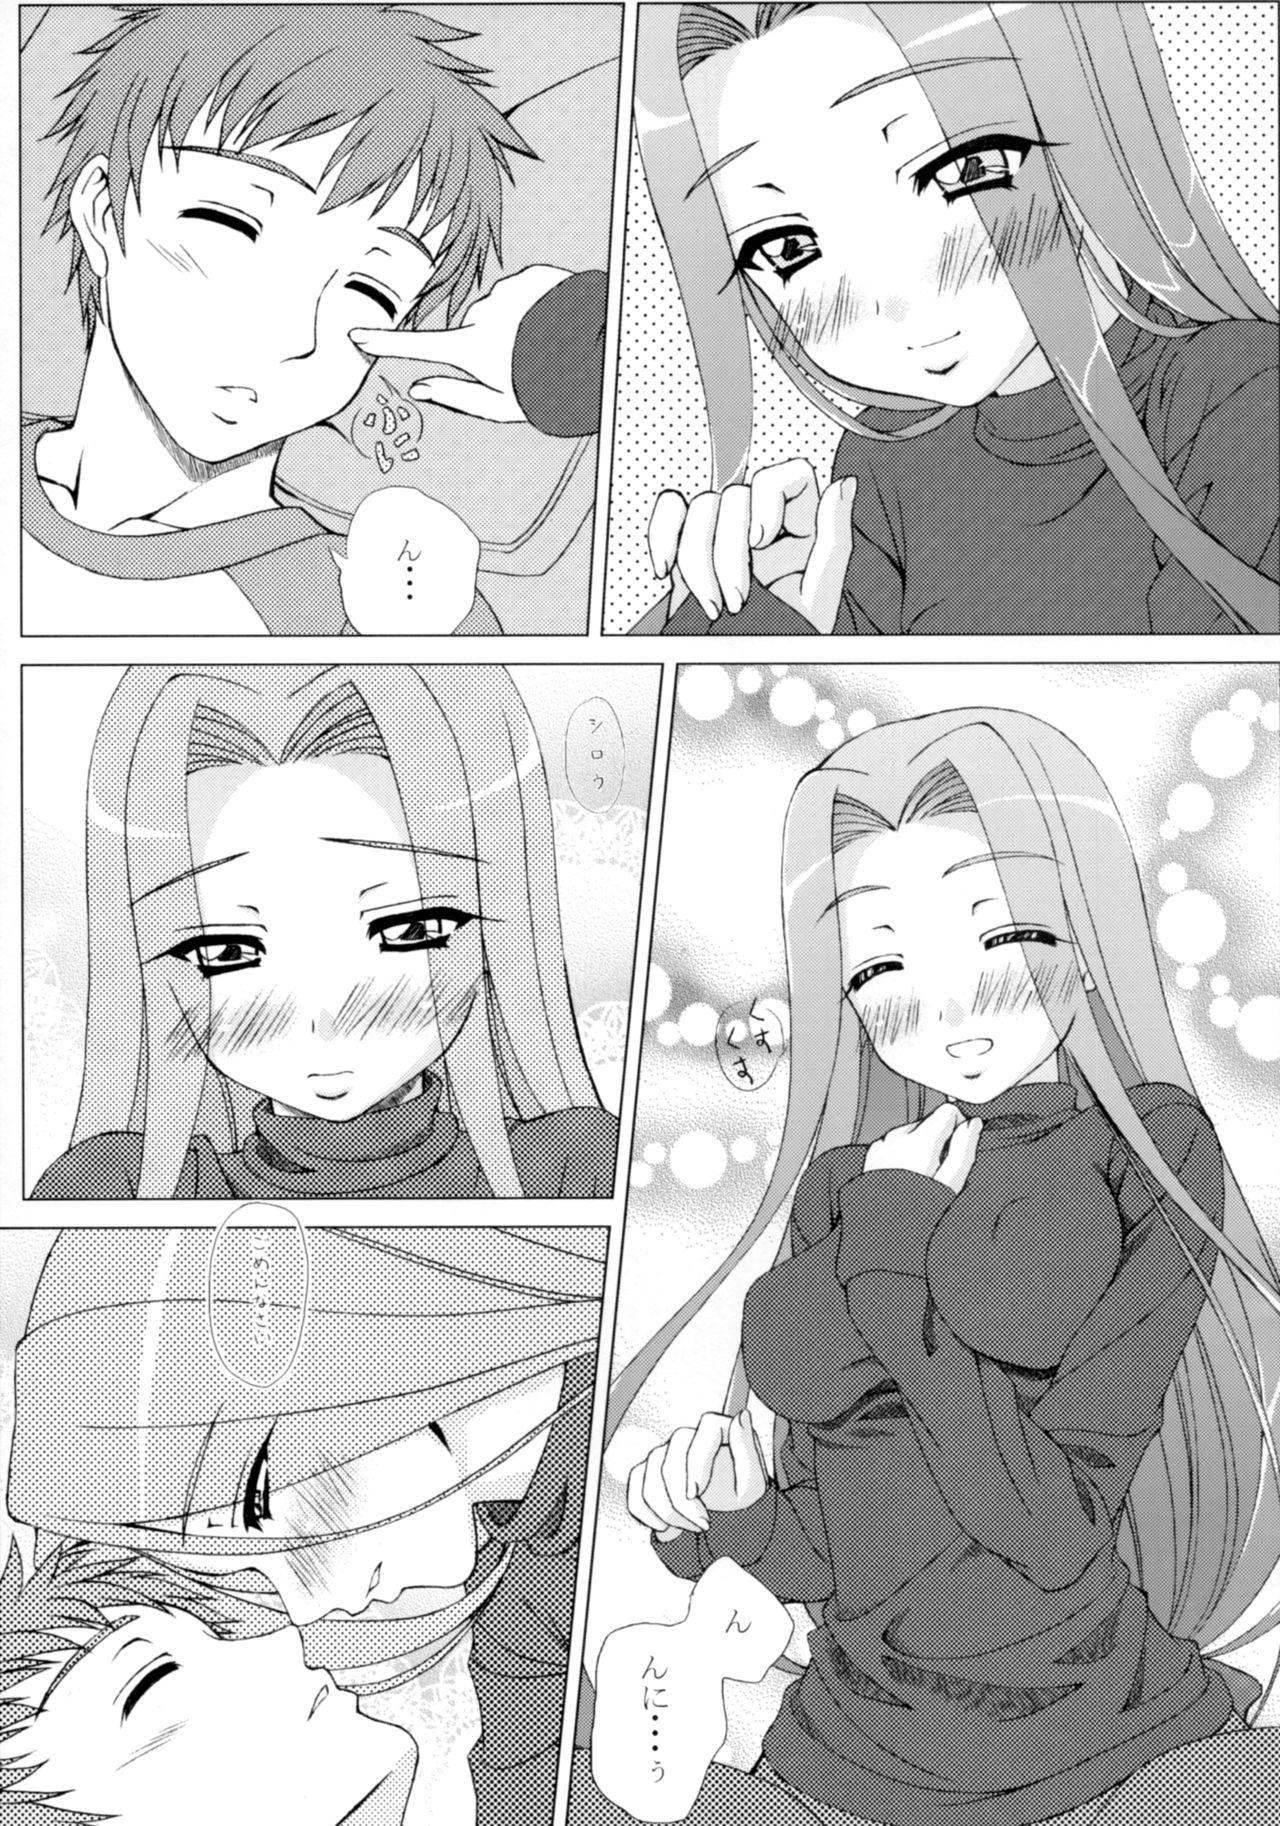 French CUTE - Fate stay night Lezbi - Page 4